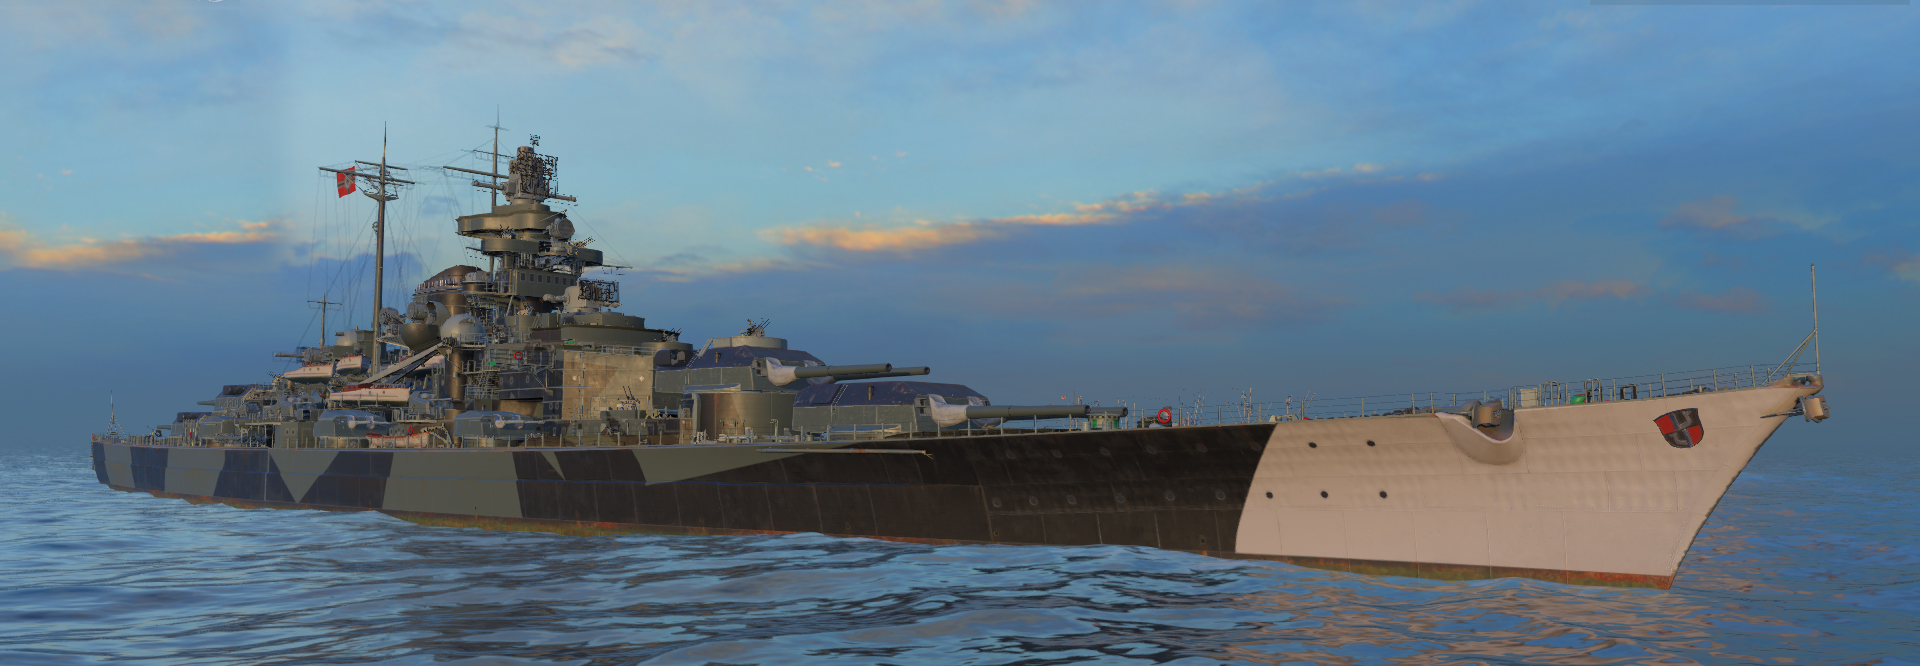 wow rendition of KMS Tirpitz